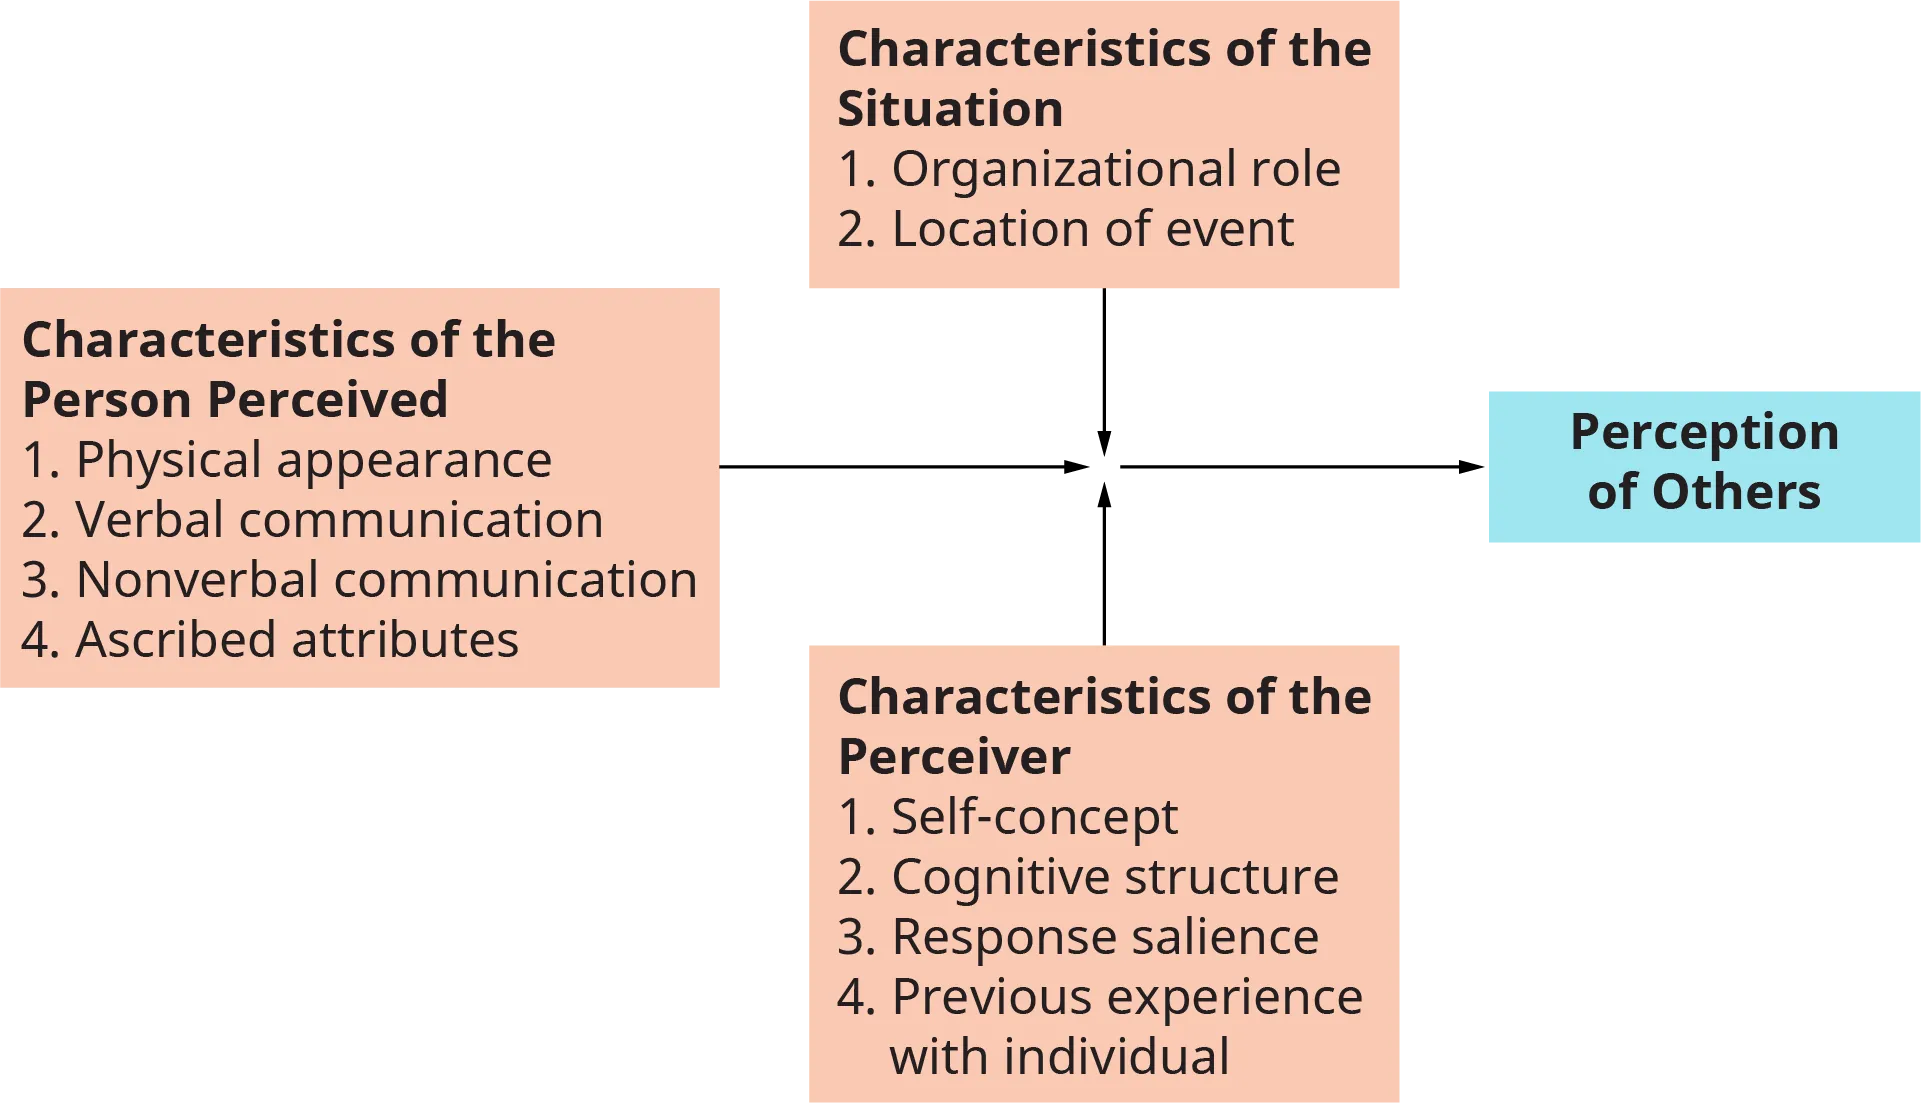 An illustration shows the major influences on social perception in organizations.